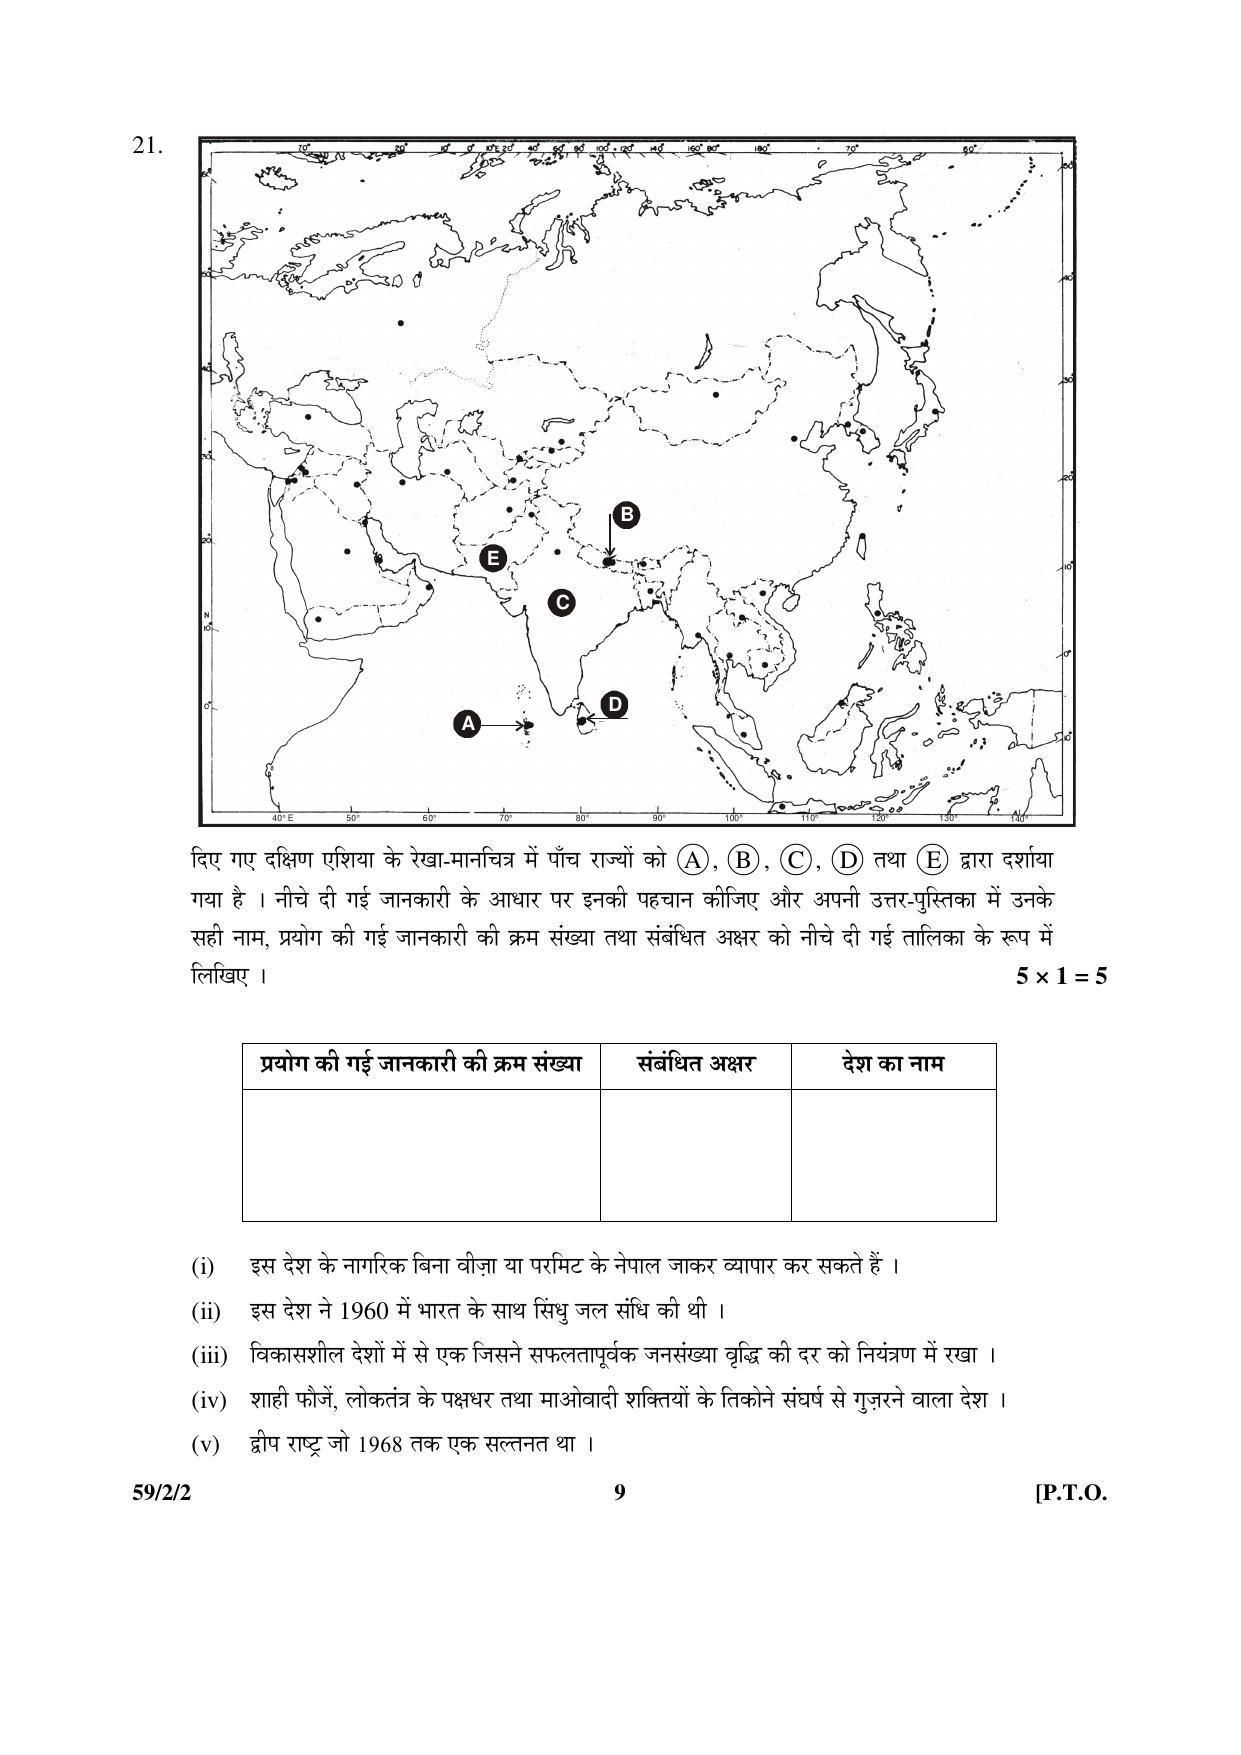 CBSE Class 12 59-2-2 _Political Science 2016 Question Paper - Page 9